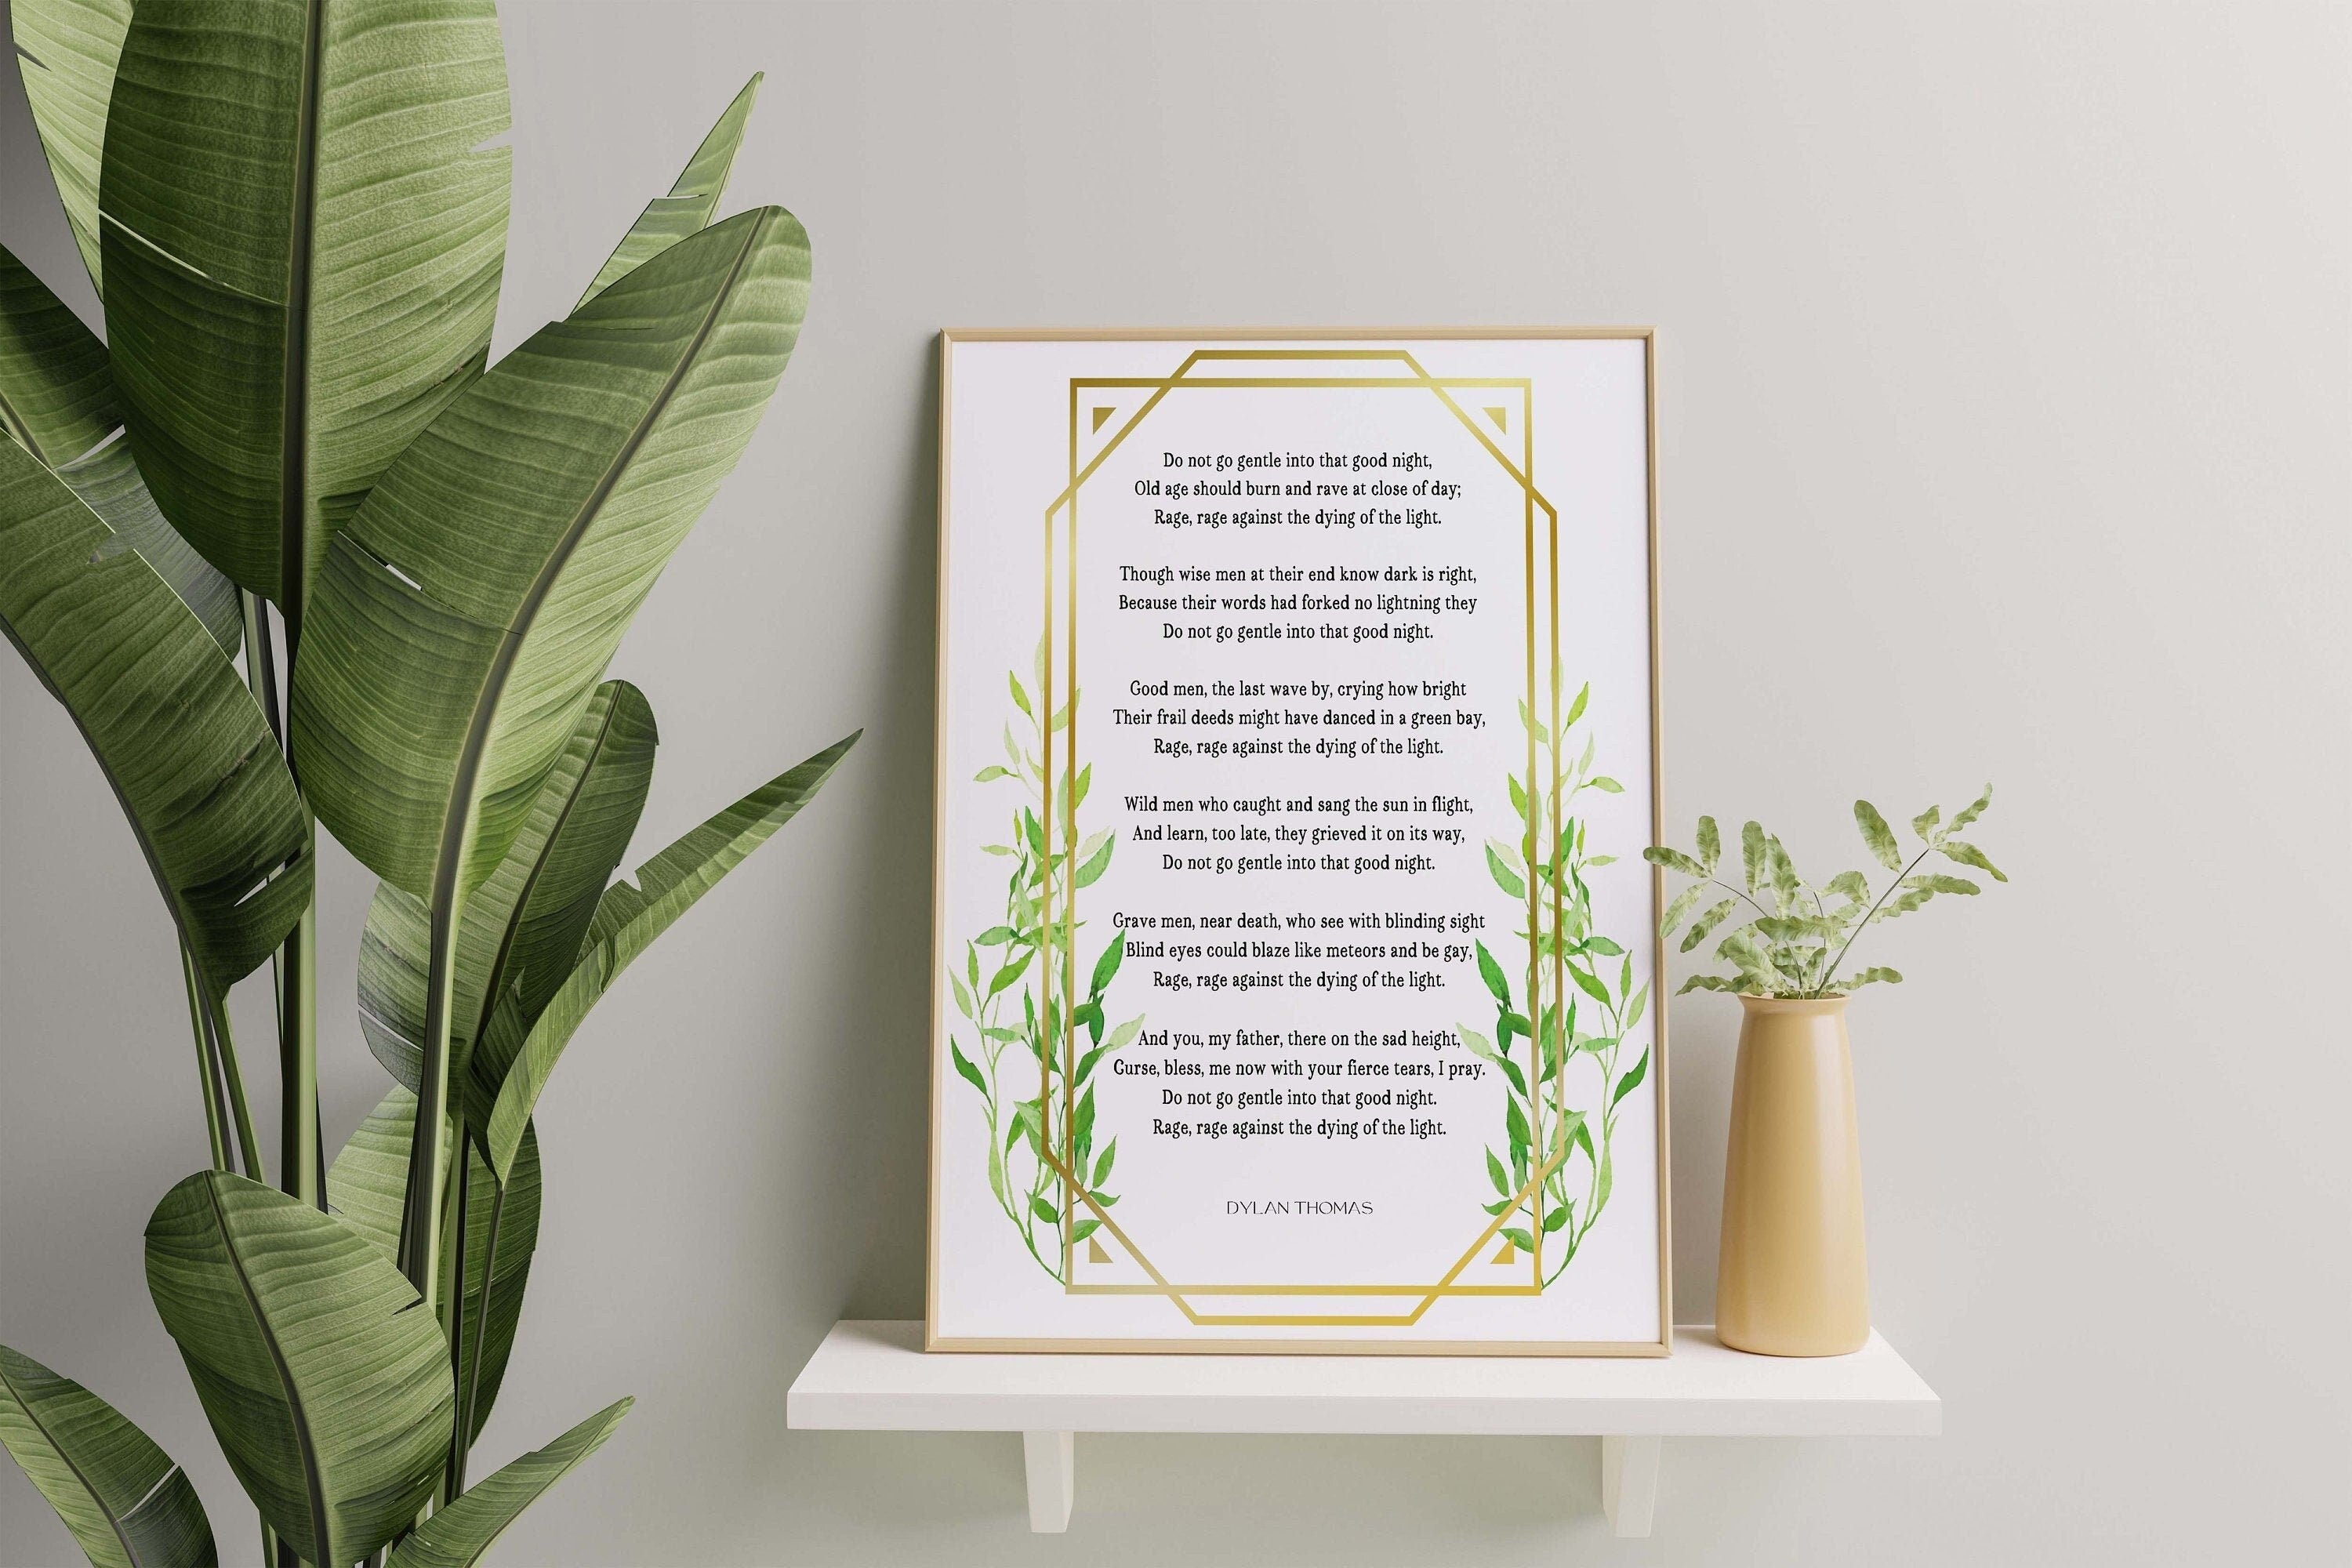 Dylan Thomas Poem Print, Do Not Go Gentle Into That Good Night Poem